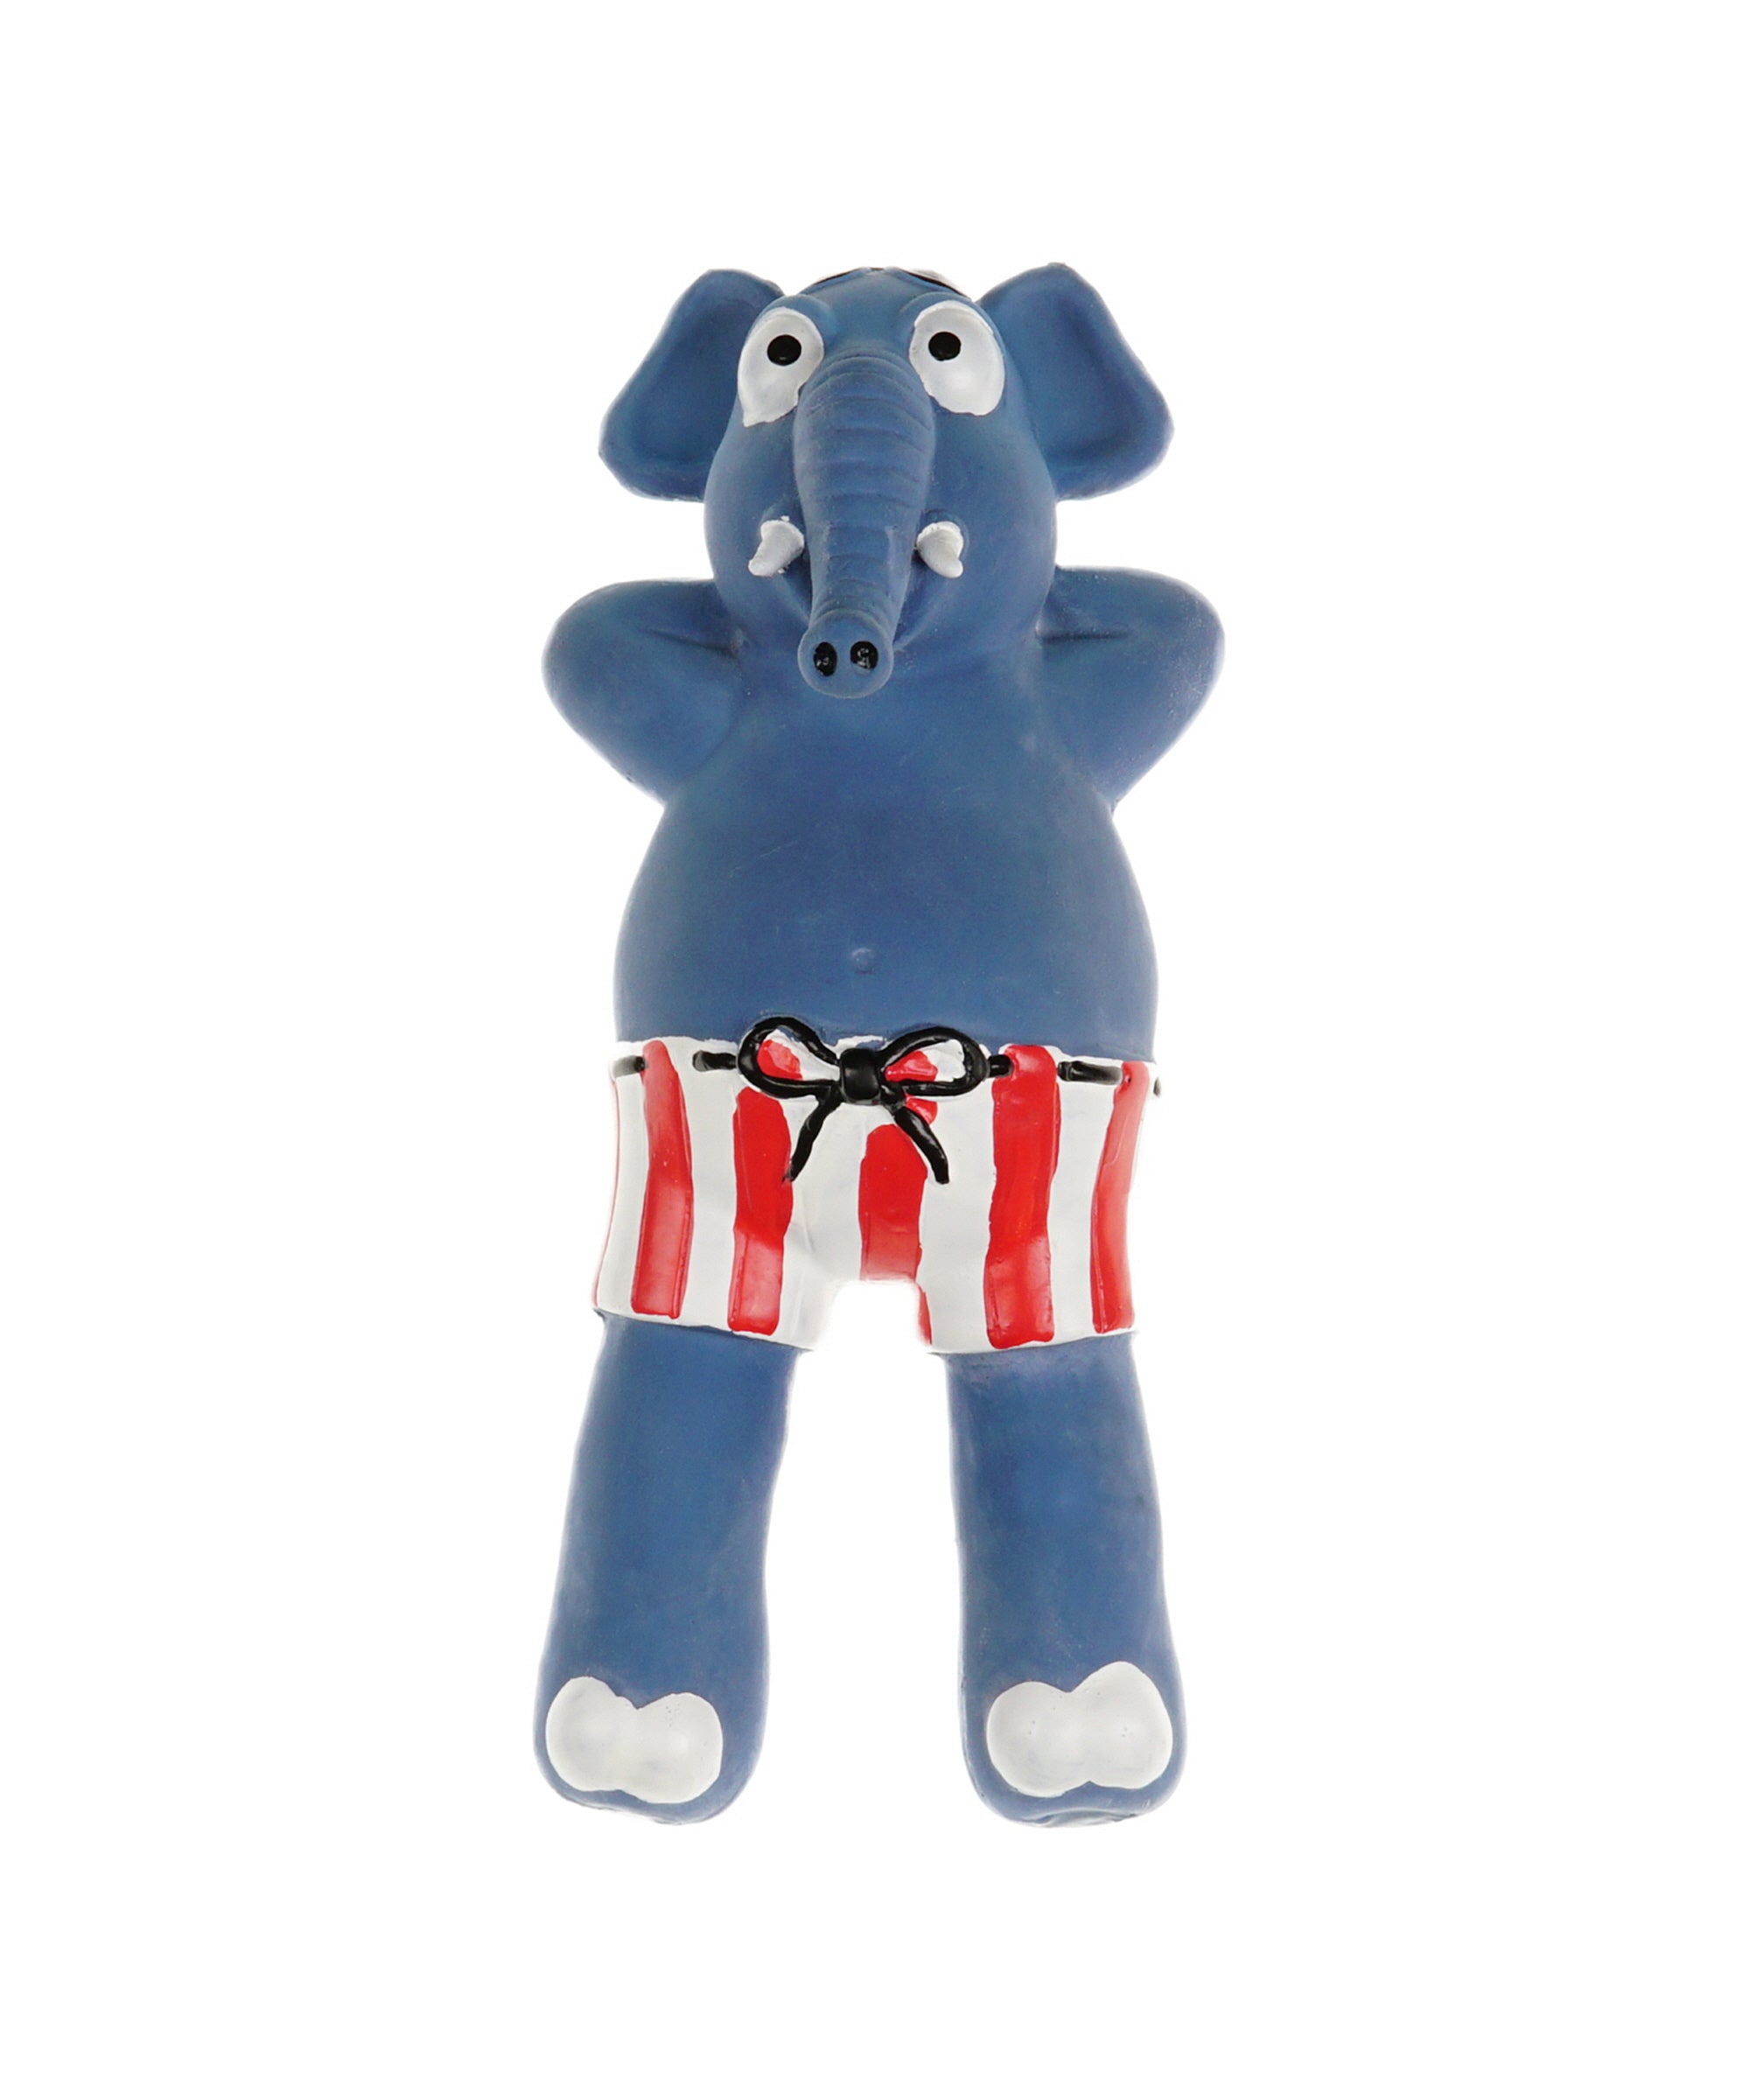 blue rubber elephant toy in swim trunks for dogs 8.5"